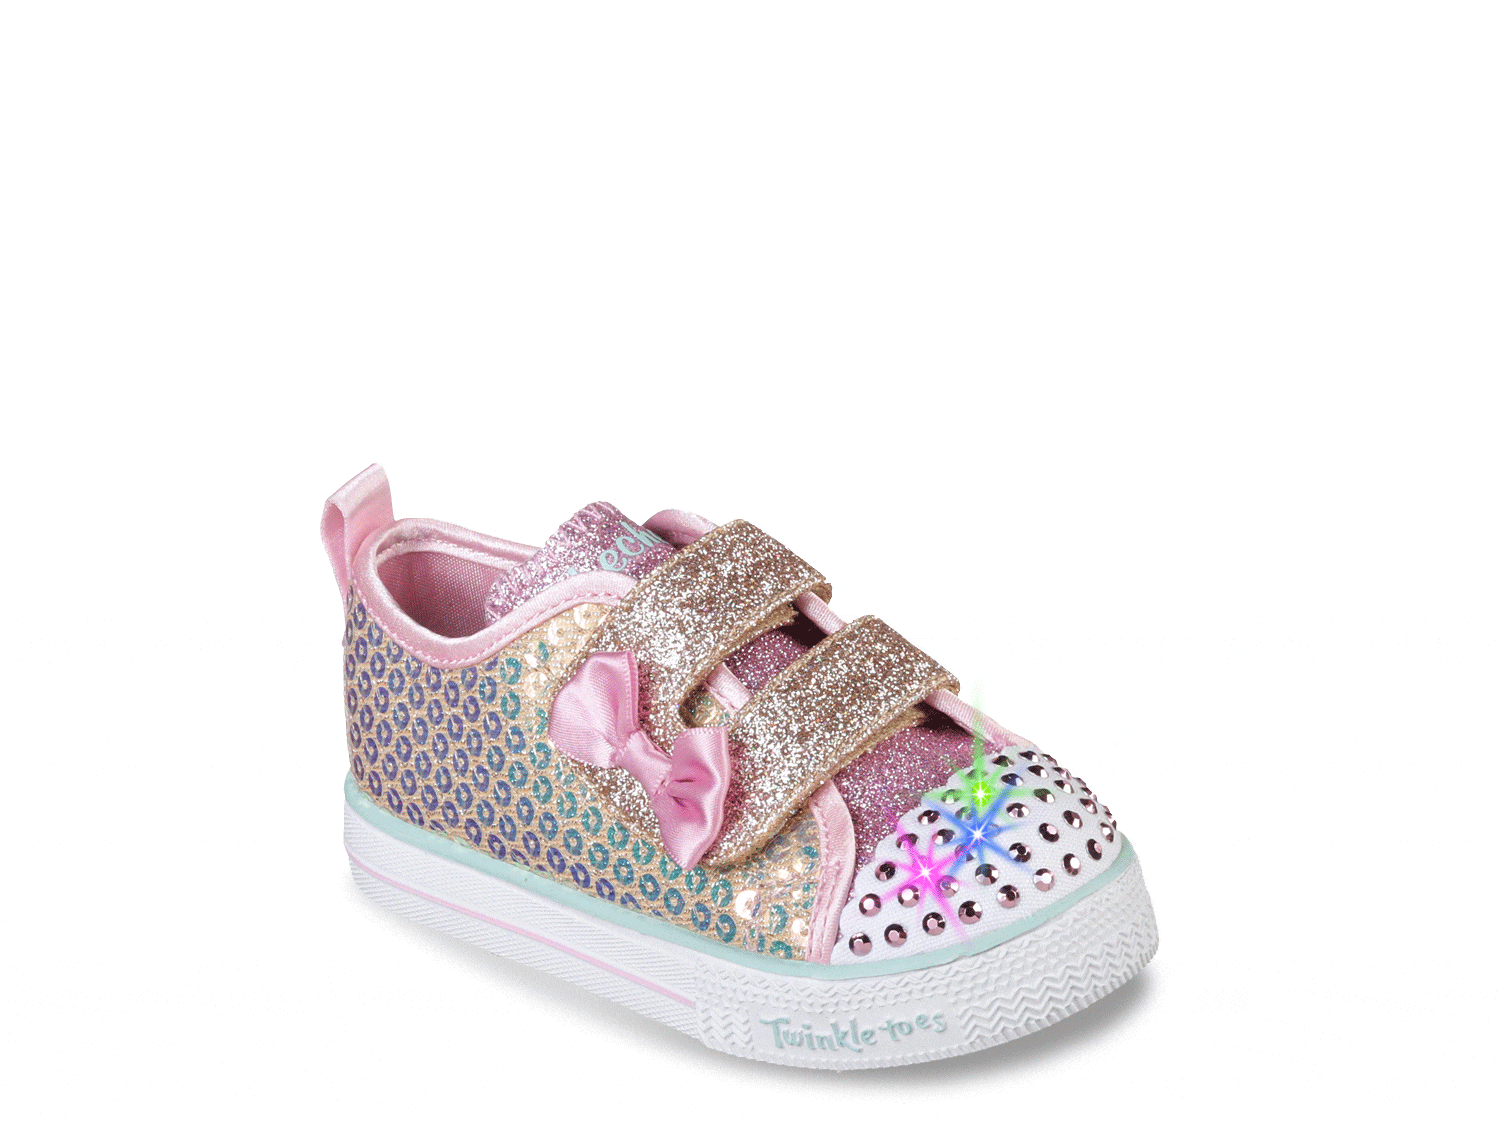 skechers twinkle toes light up shoes